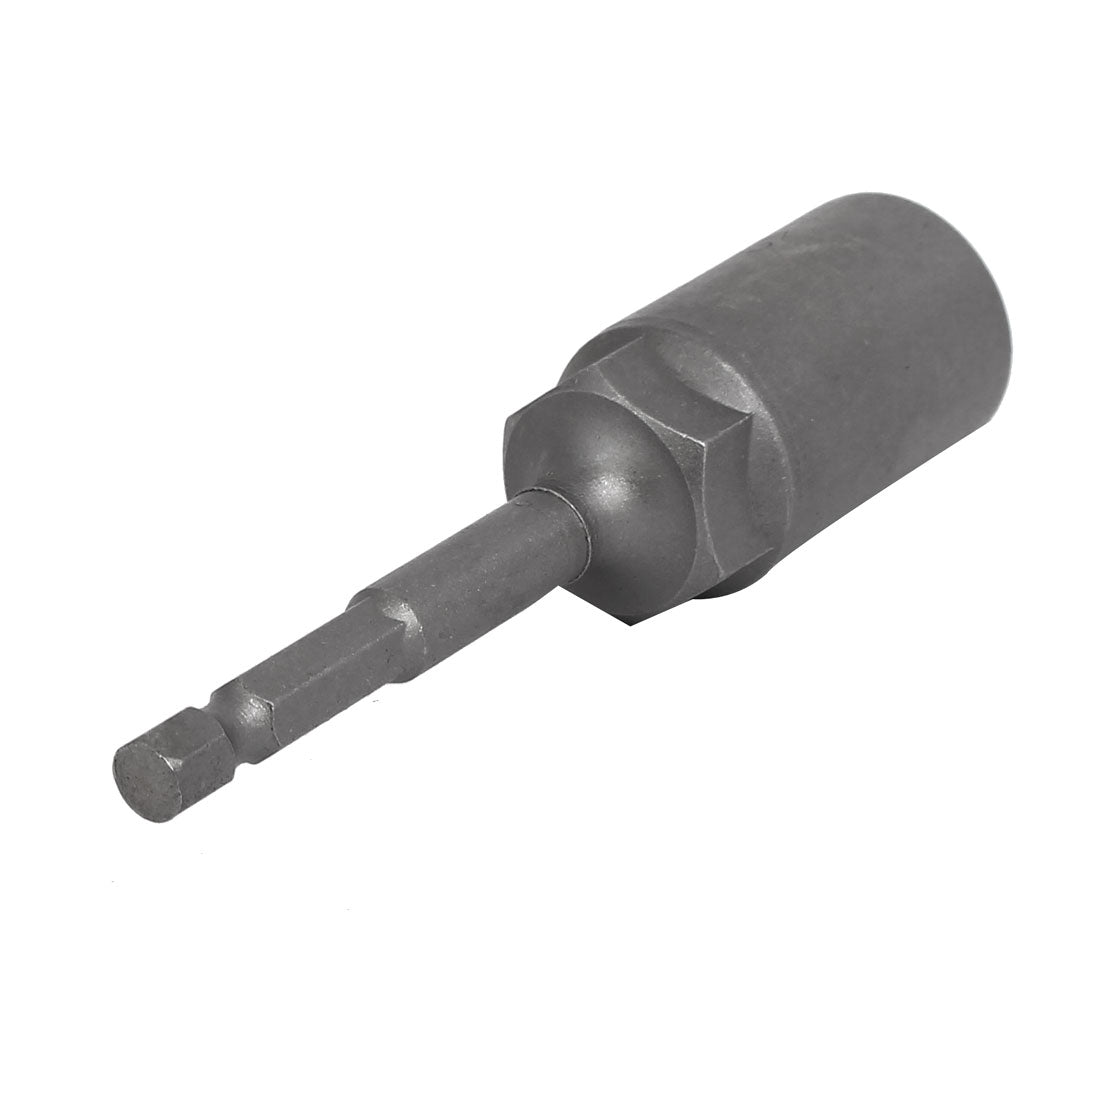 uxcell Uxcell 17mm Socket 1/4-inch Hex Shank 100mm Length Nut Drivers Adapter Drill Bit Gray